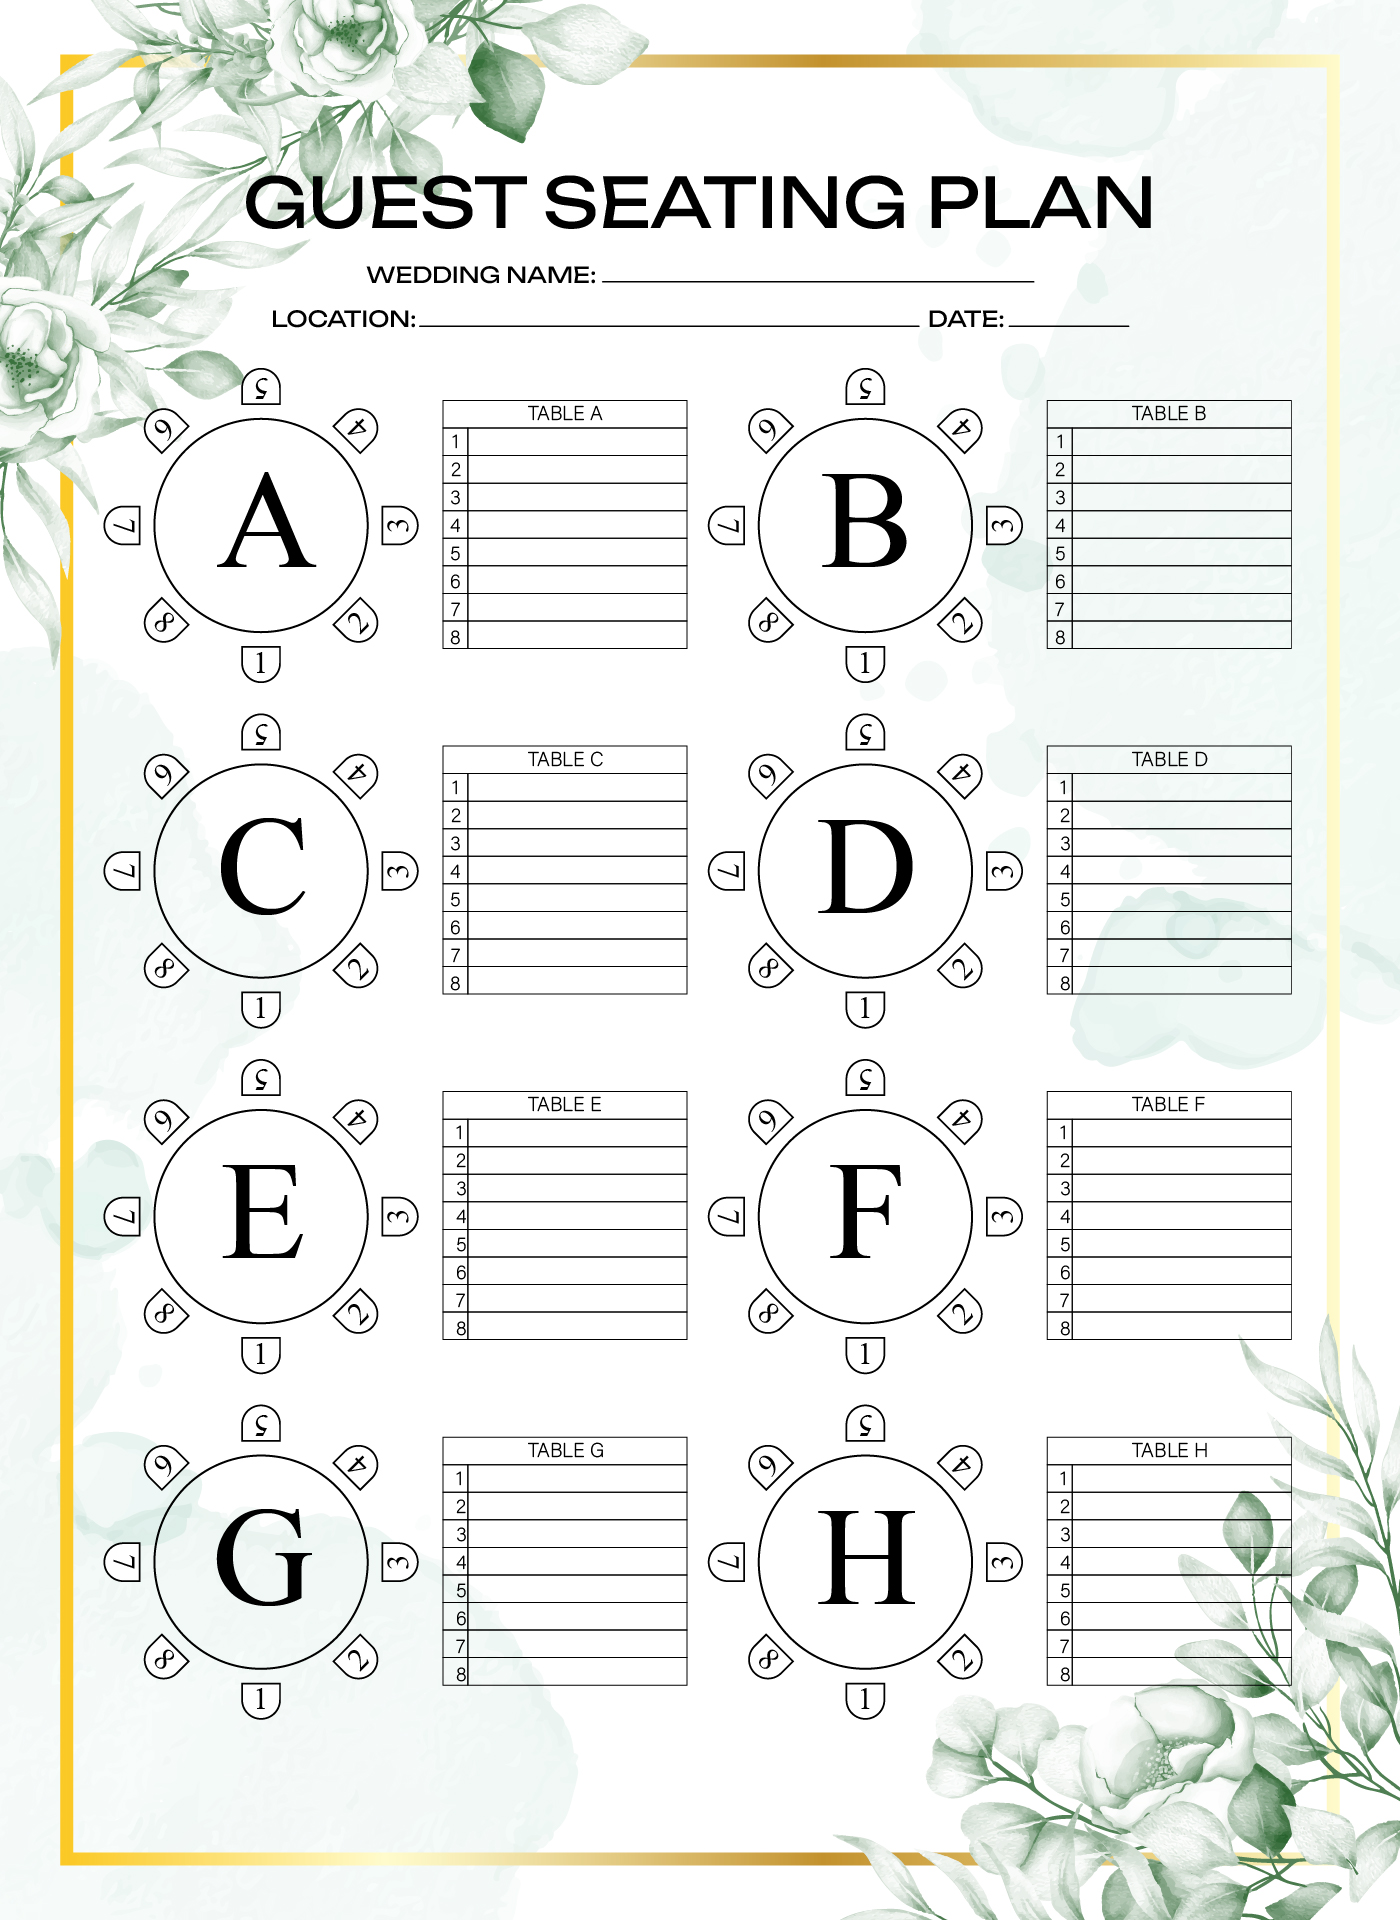 Blank Seating Chart For Wedding Reception